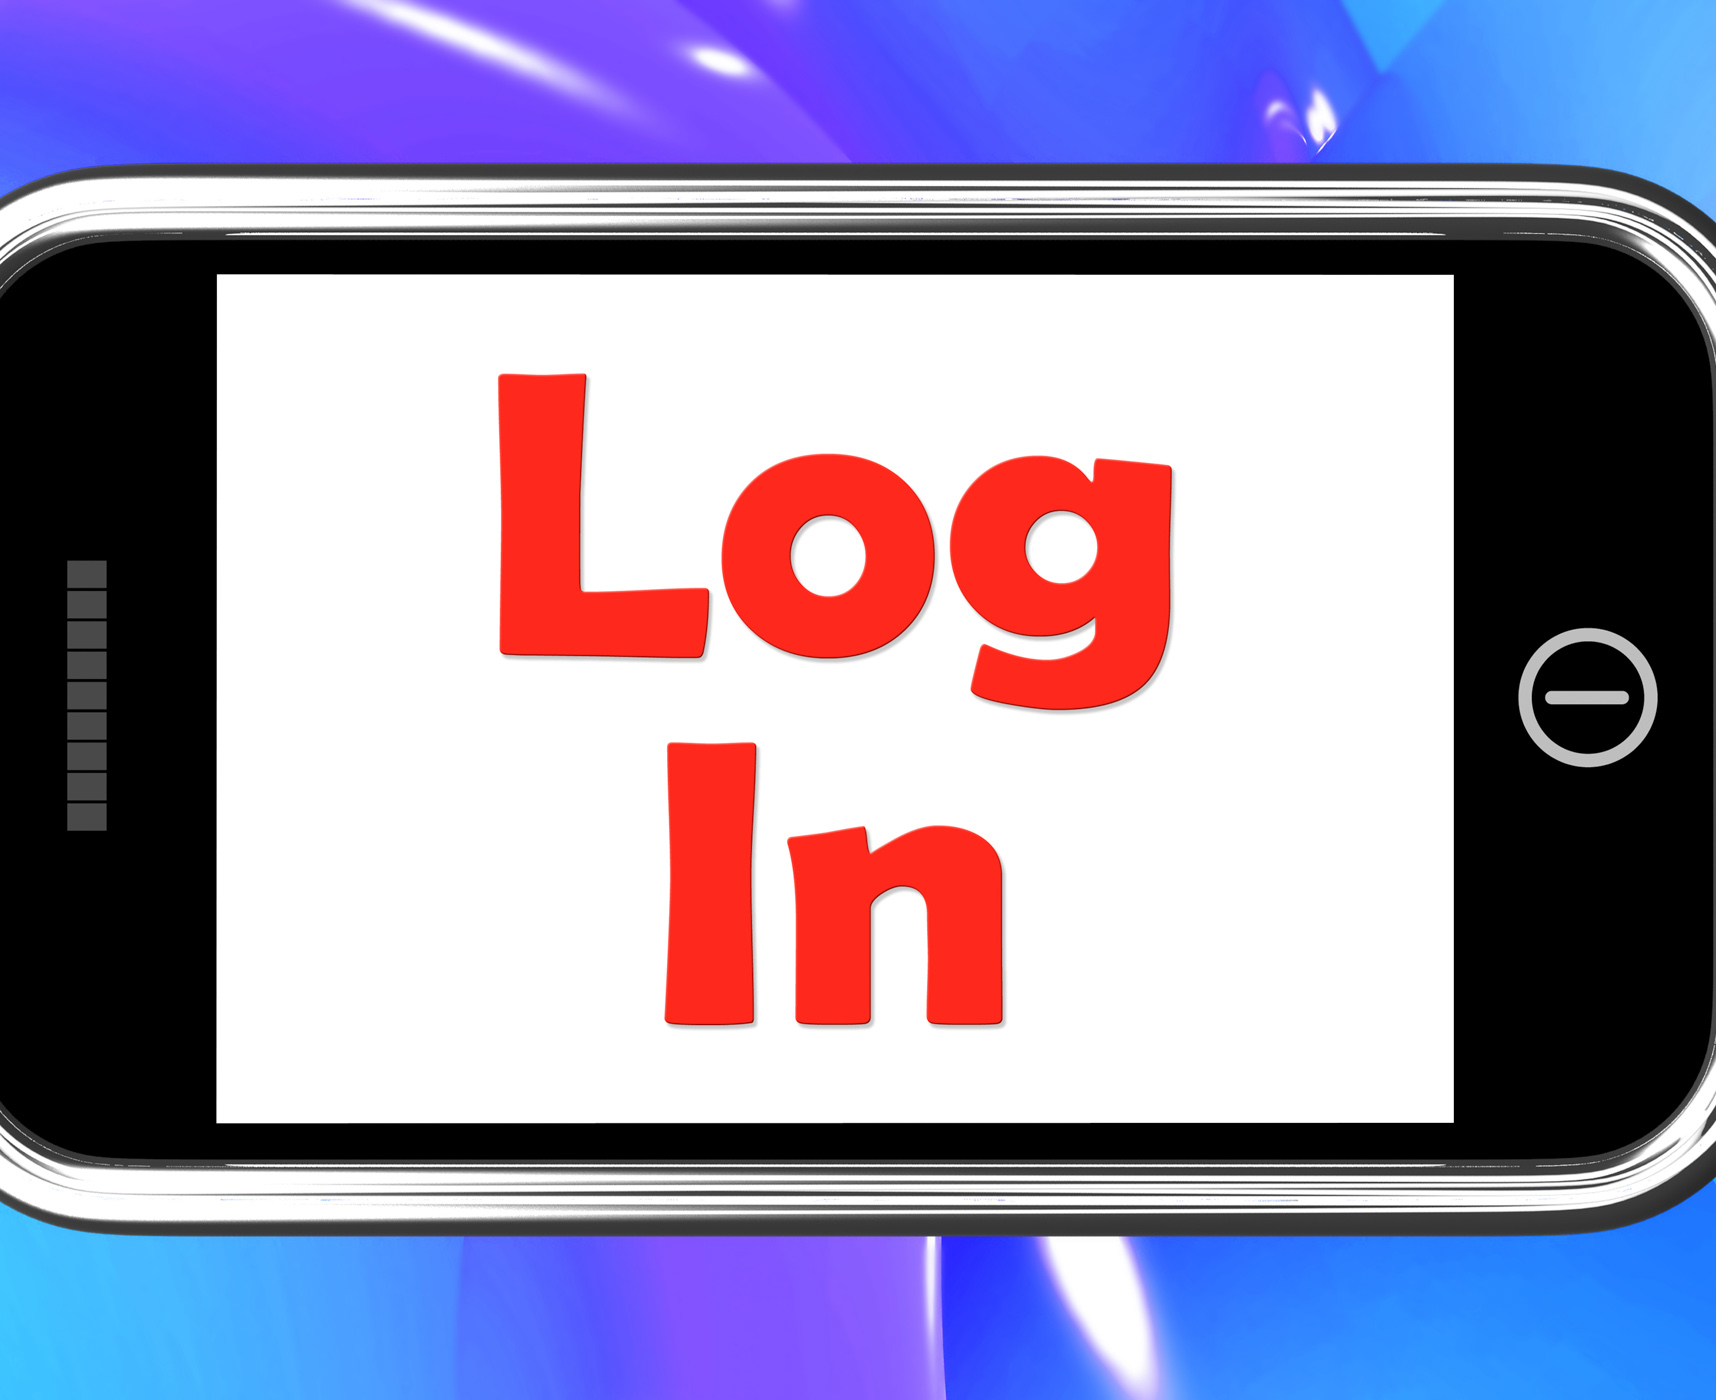 Log In Login On Phone Shows Sign In Online, Cellphone, Security, Username, Up, HQ Photo